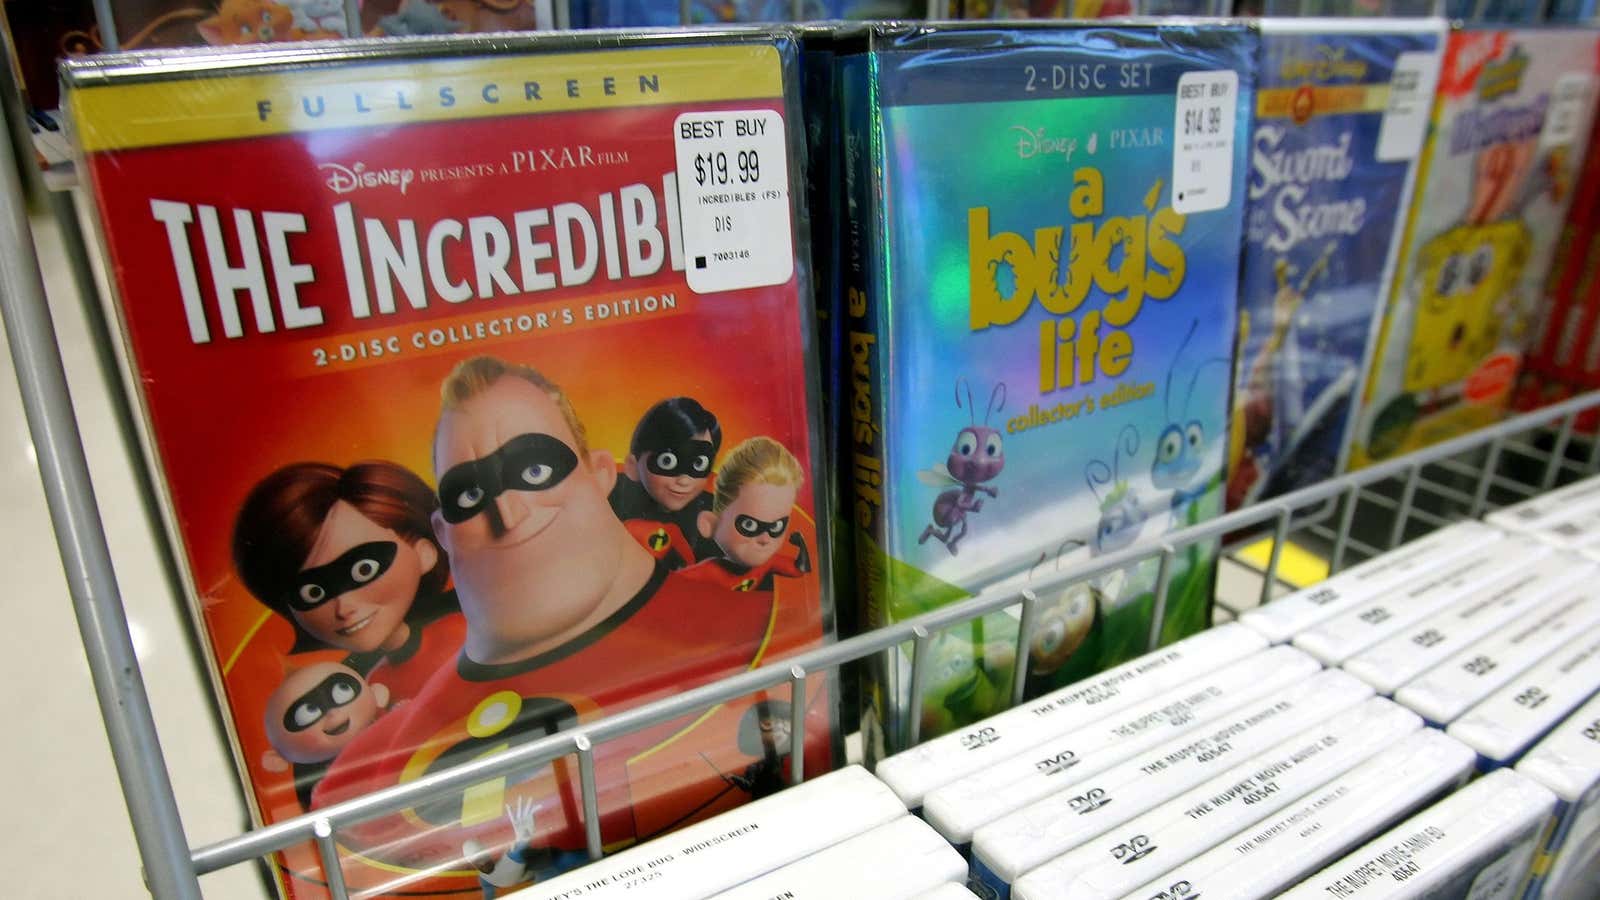 When the last movie came out, DVDs were still in vogue.